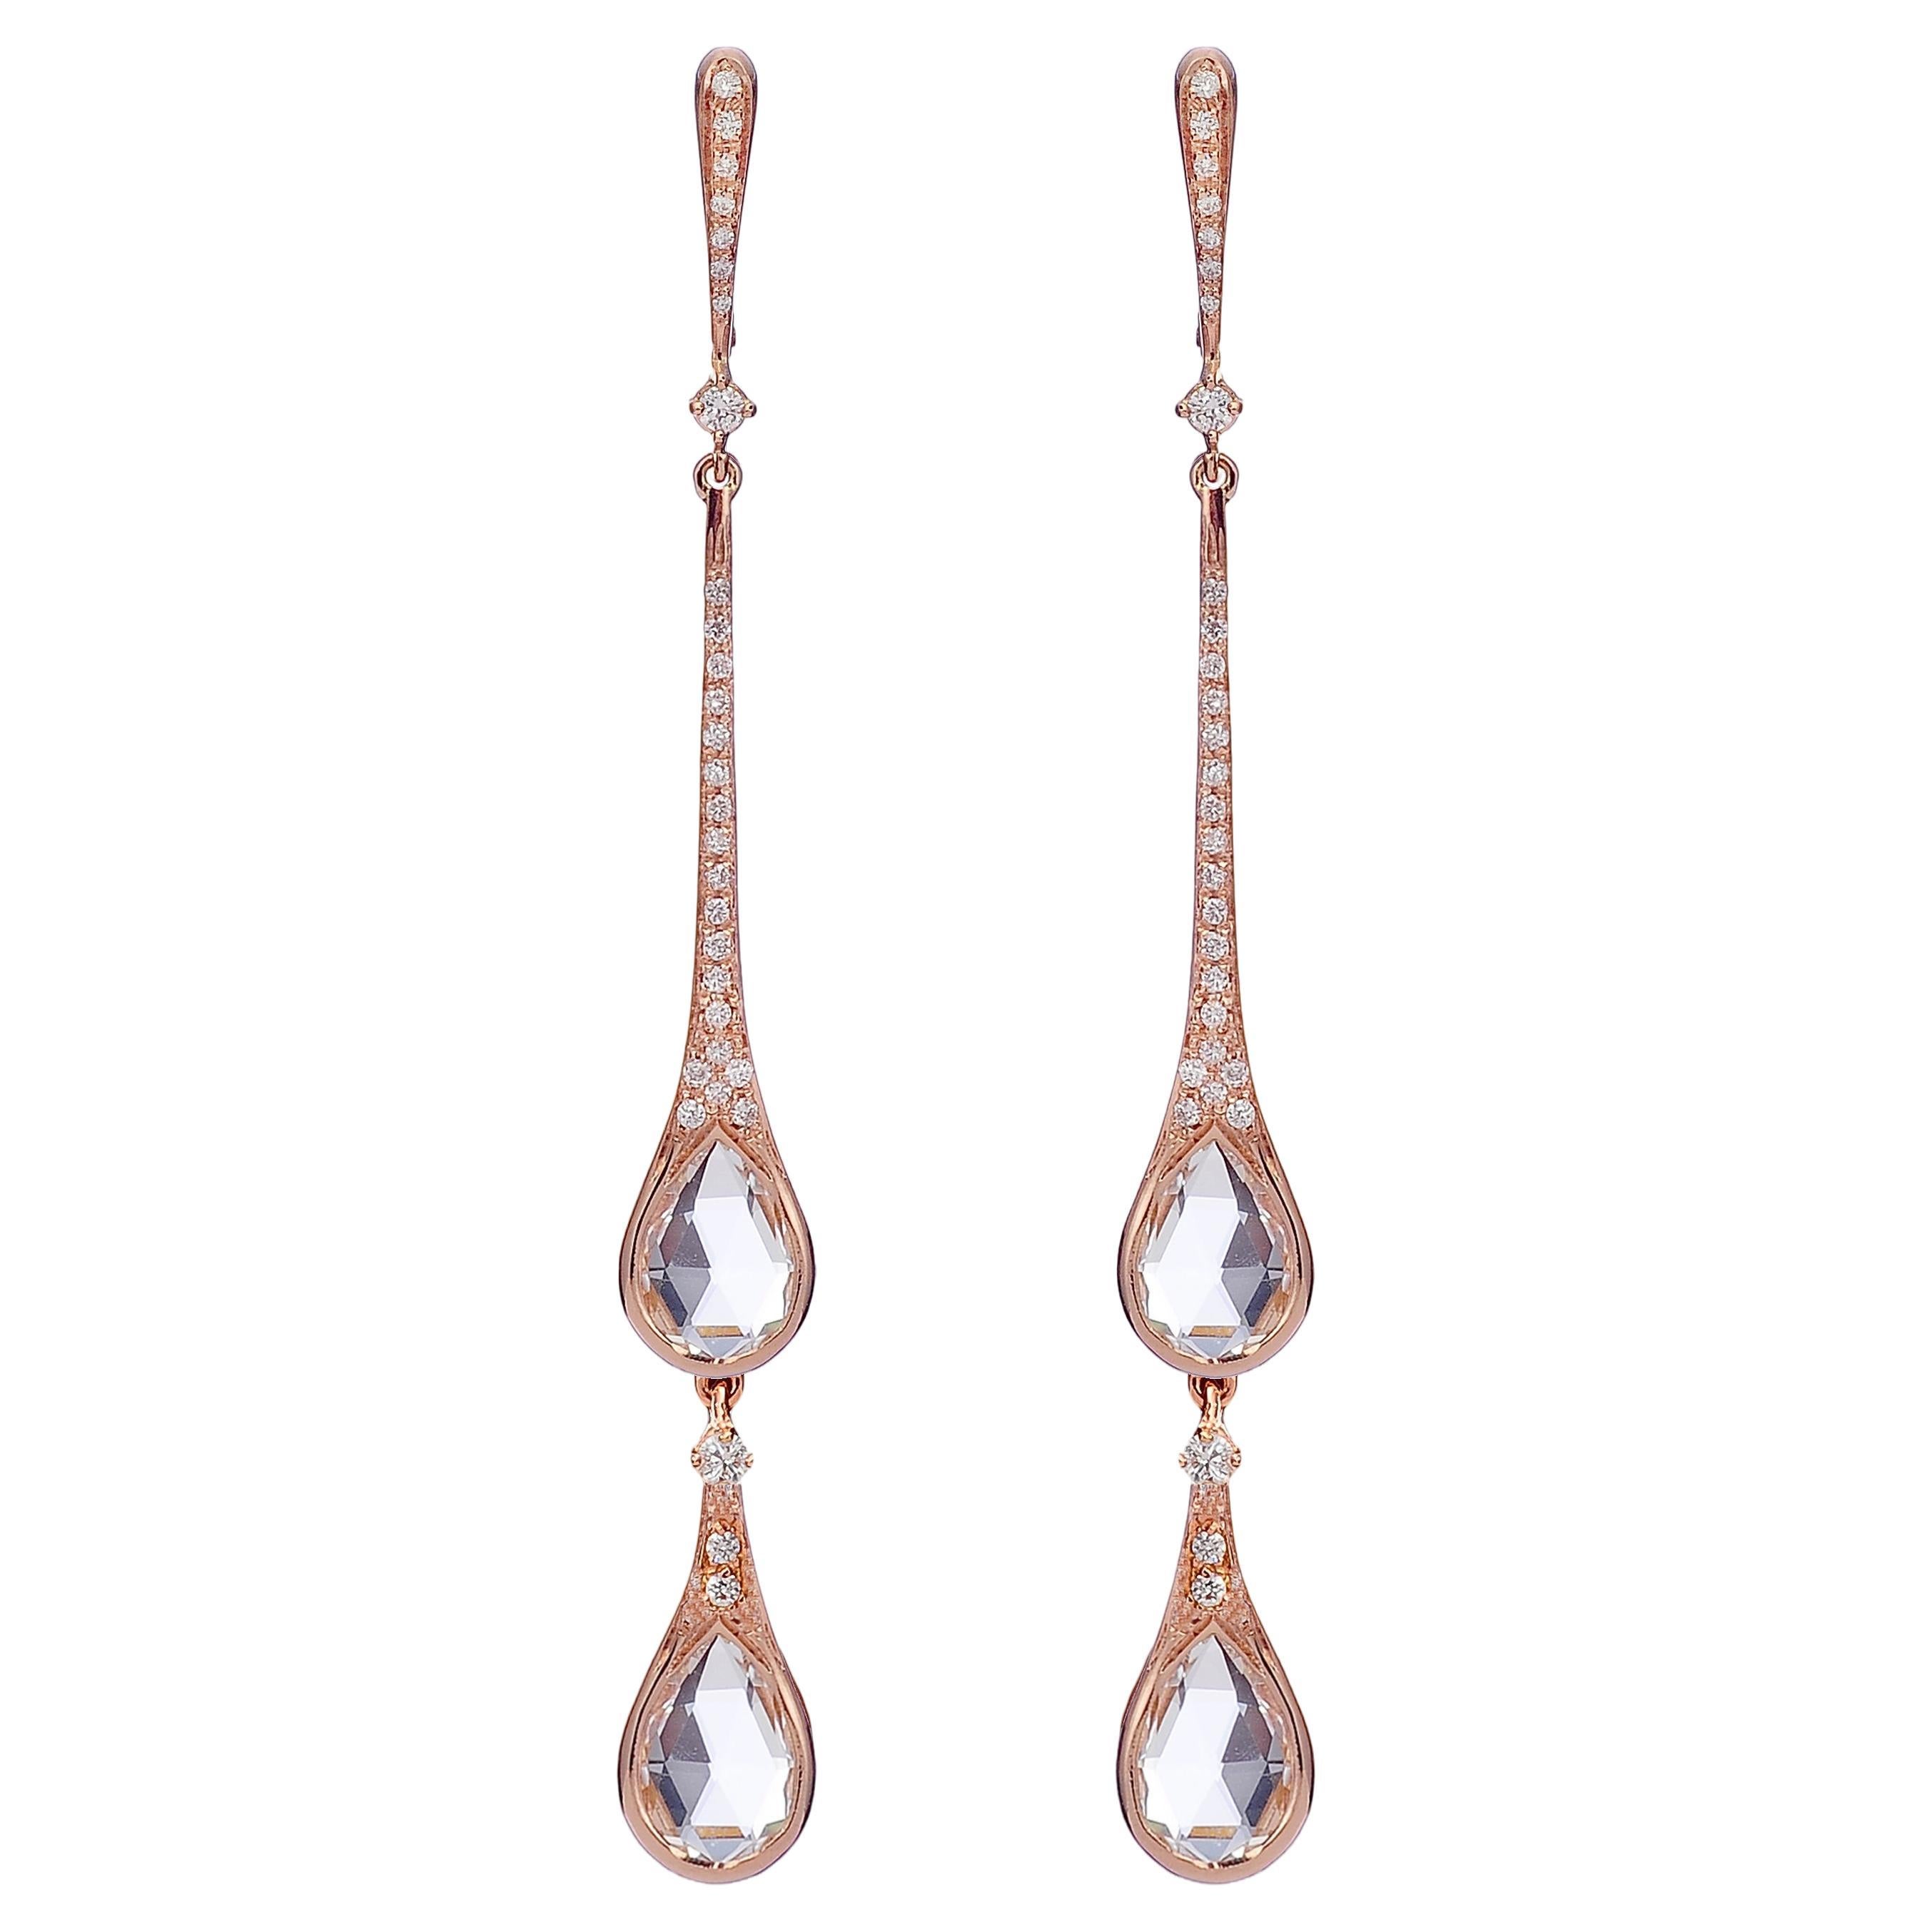 Fine Chandelier Earrings with Diamonds and Rock Crystal